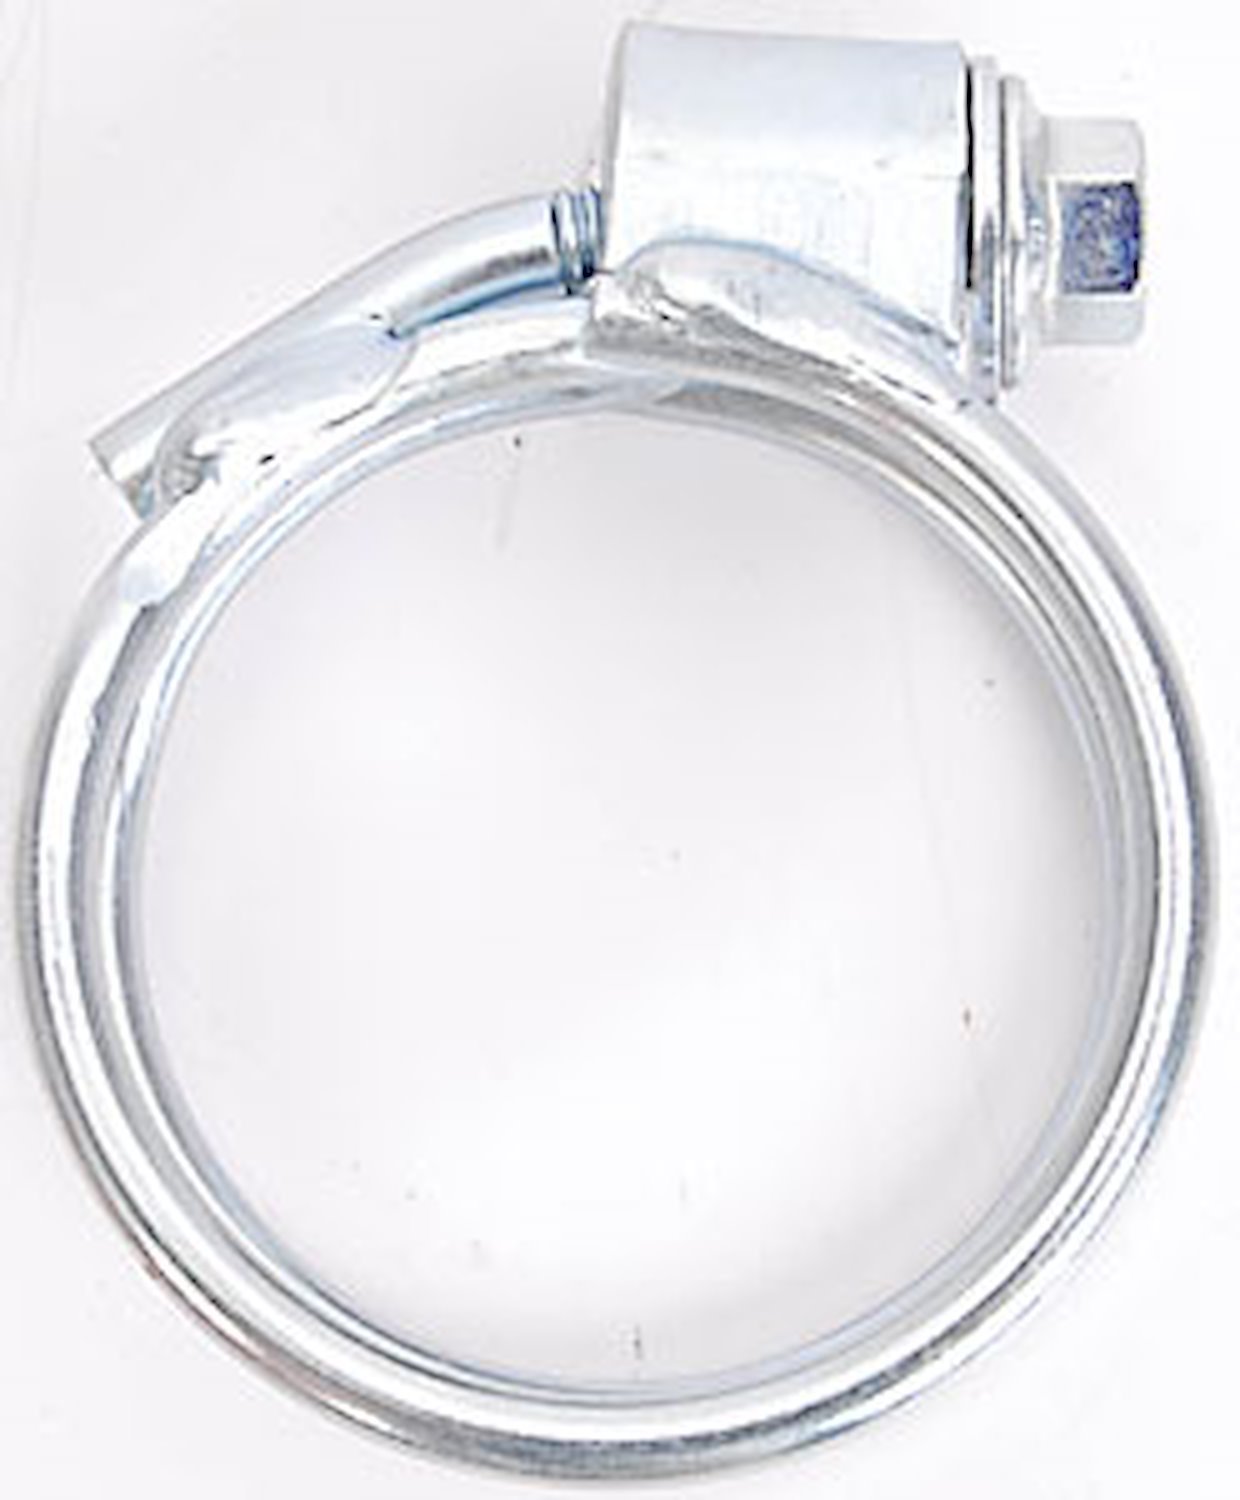 Sure Seal 2-1/4" Clamp Fits 2.330" to 2.530"